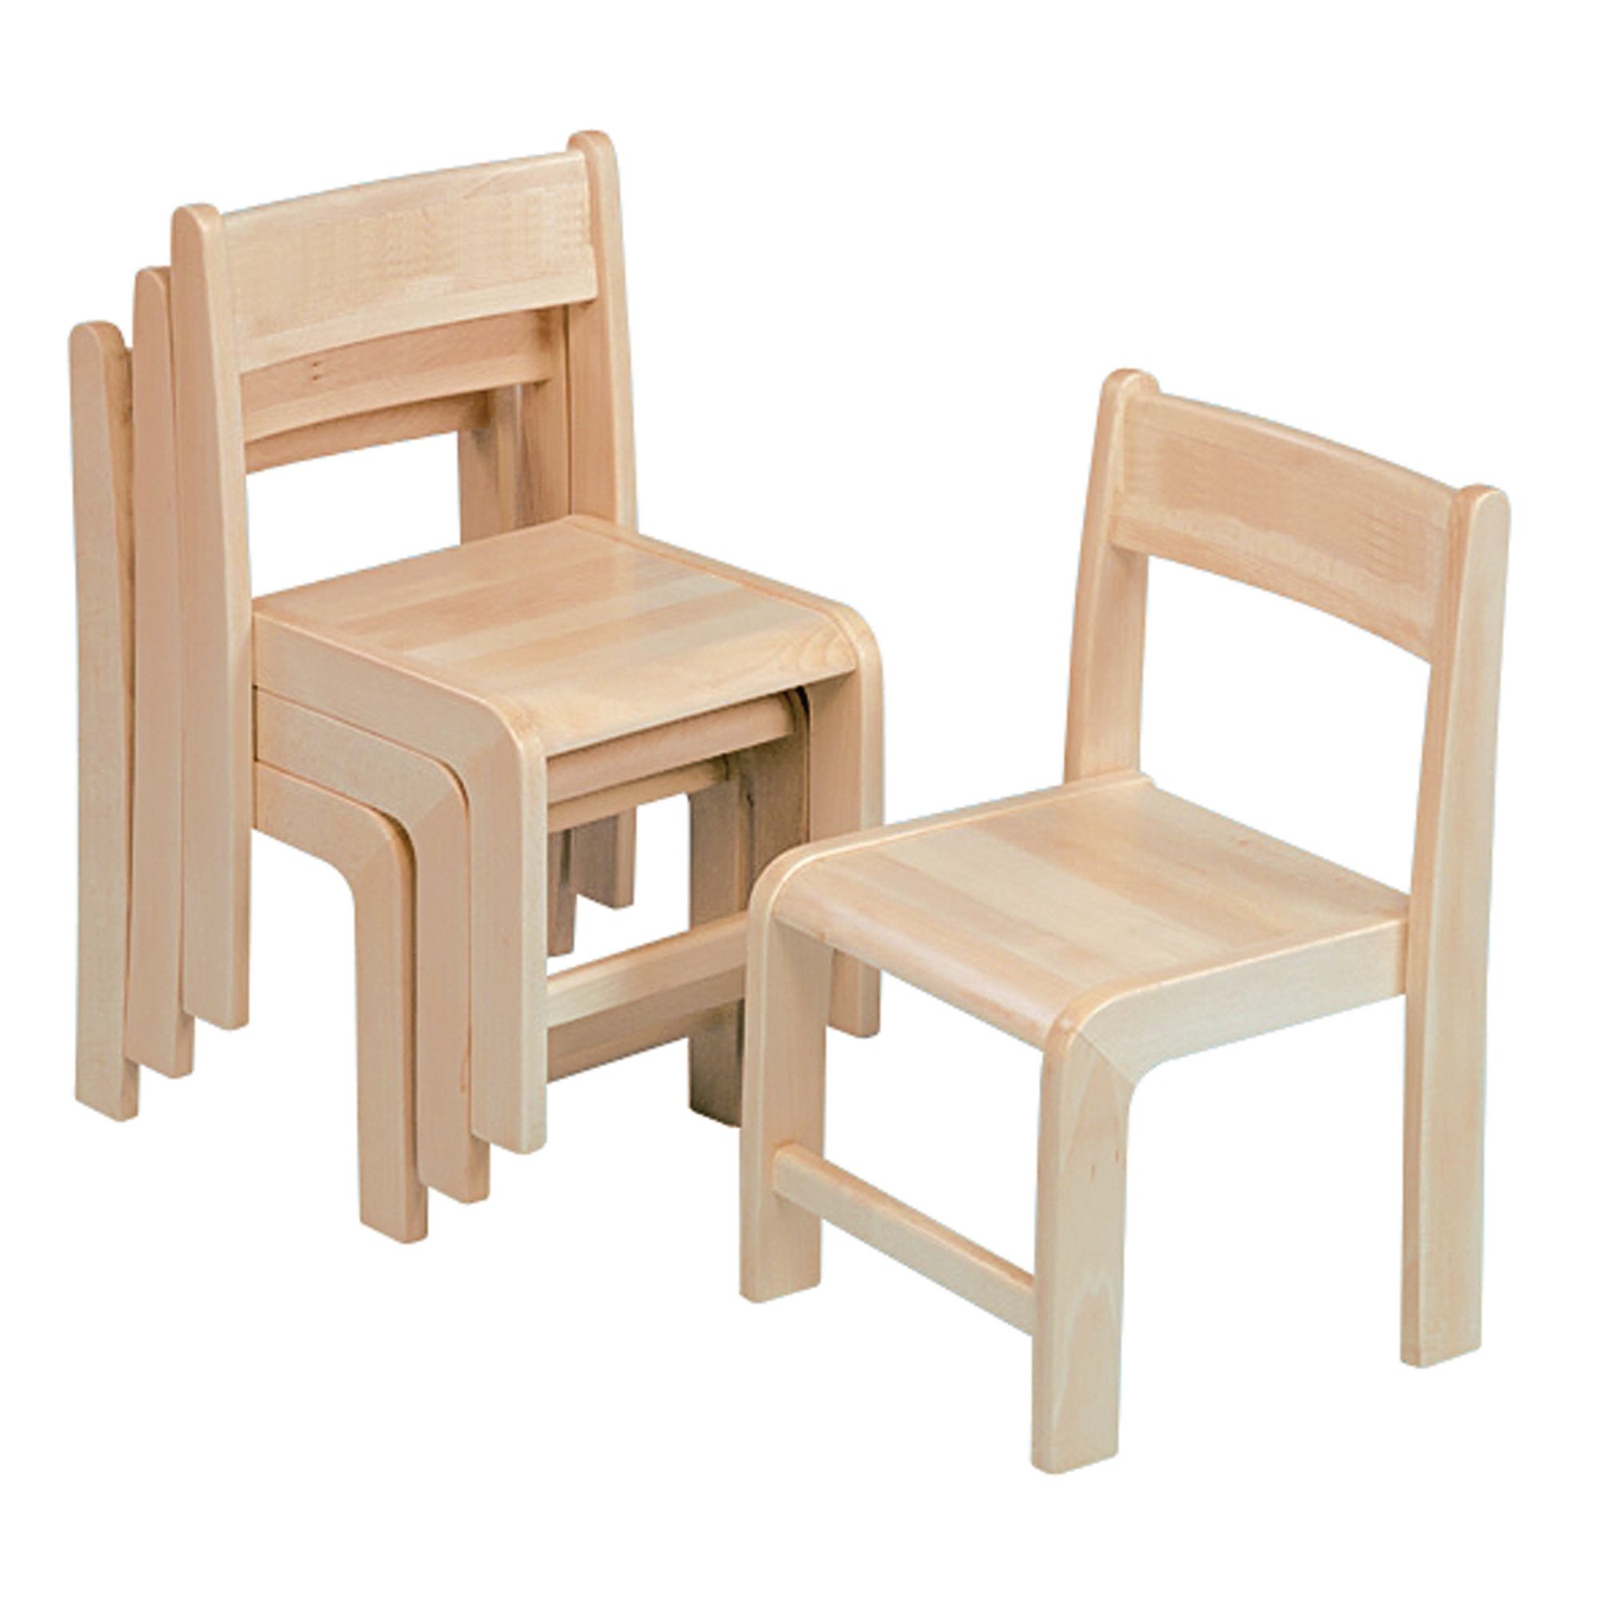 Galt Stackable Wooden Chairs - 210mm - Pack of 4